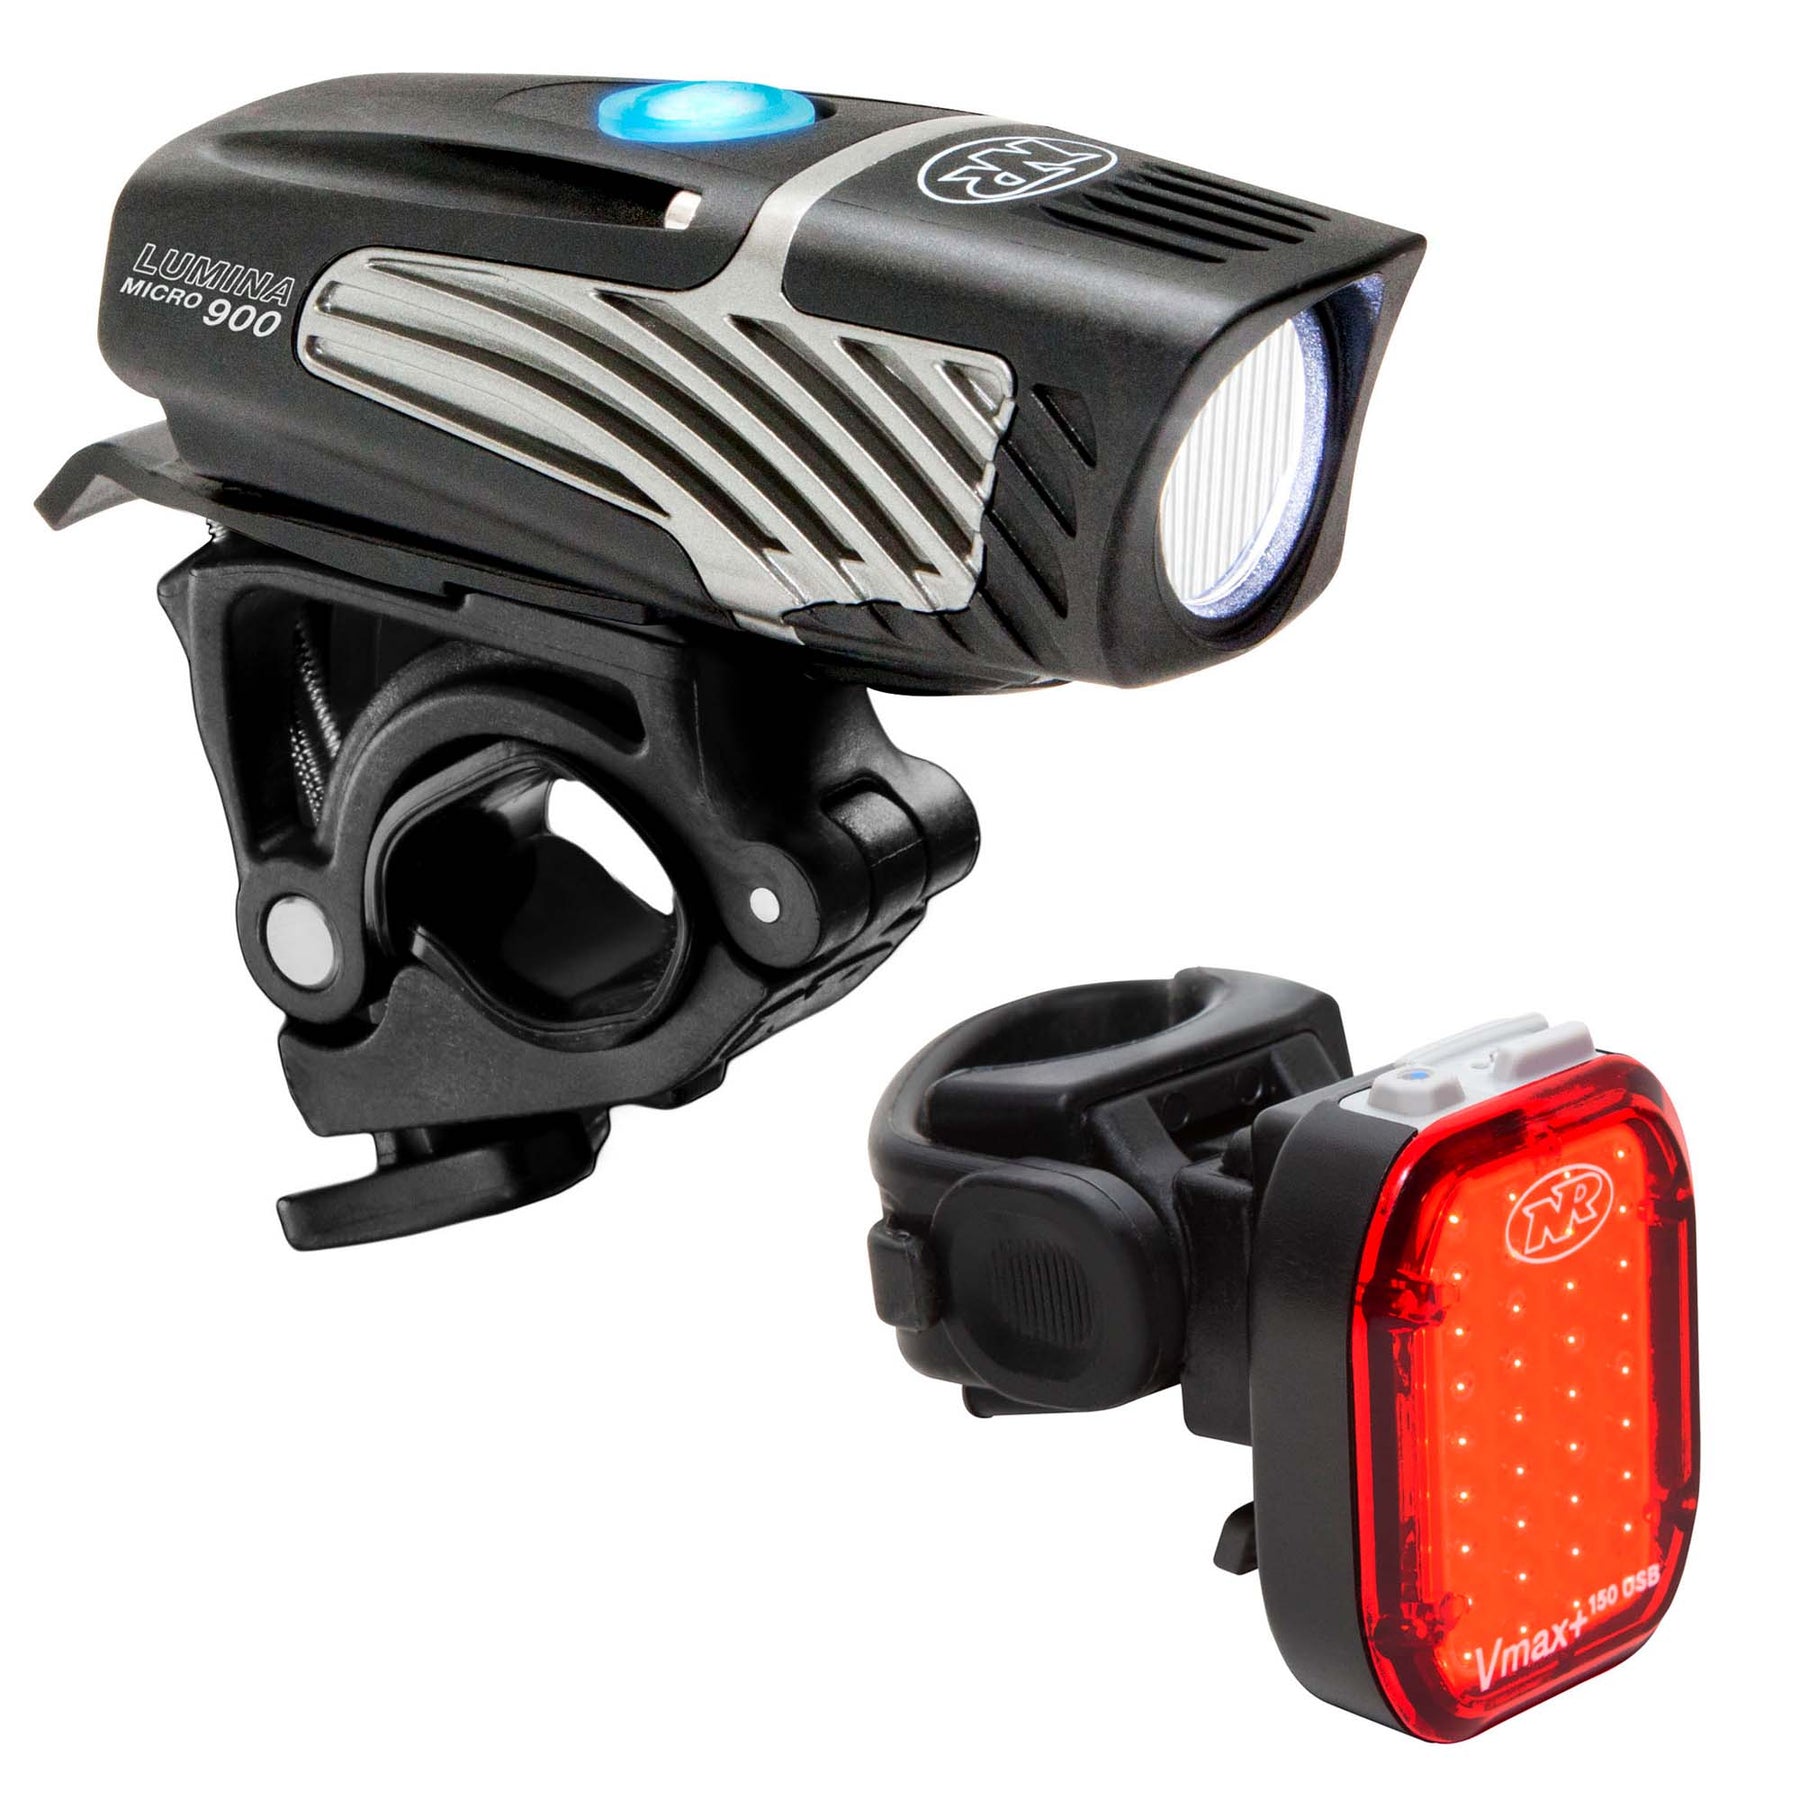 Micro 900 and Vmax+™ Combo Front and Rear Light Set – NiteRider Lighting